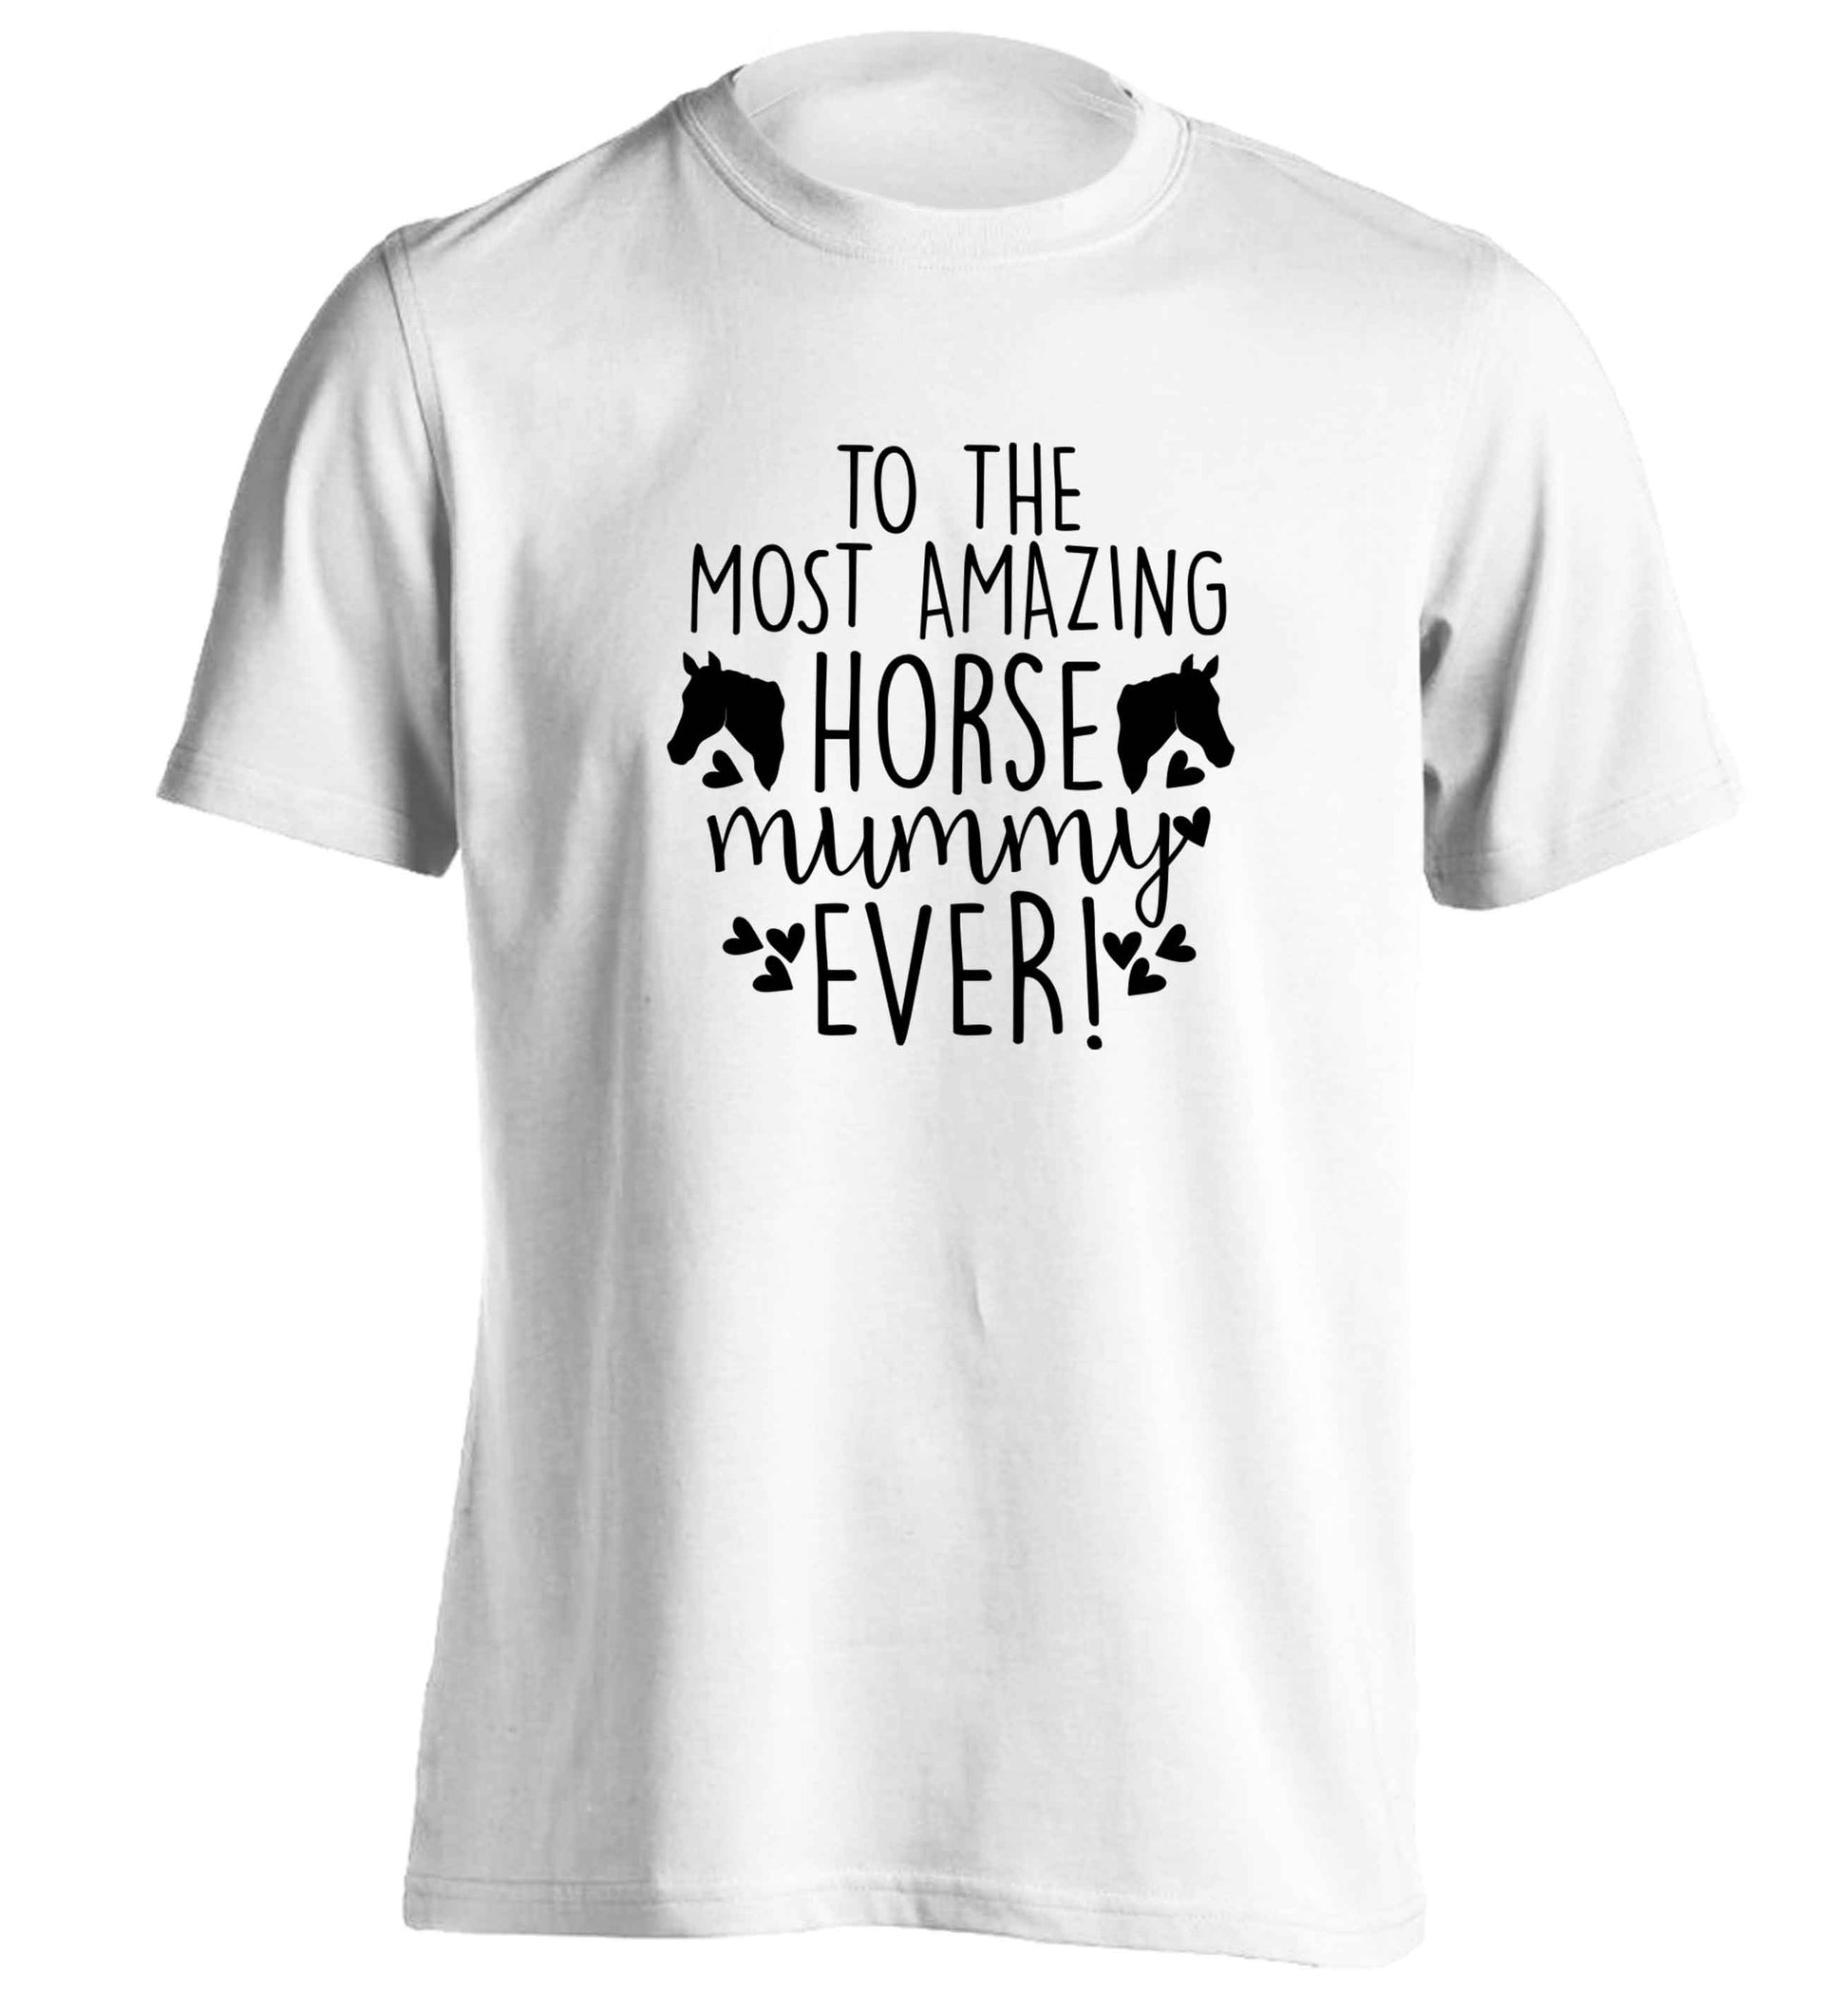 To the most amazing horse mummy ever! adults unisex white Tshirt 2XL